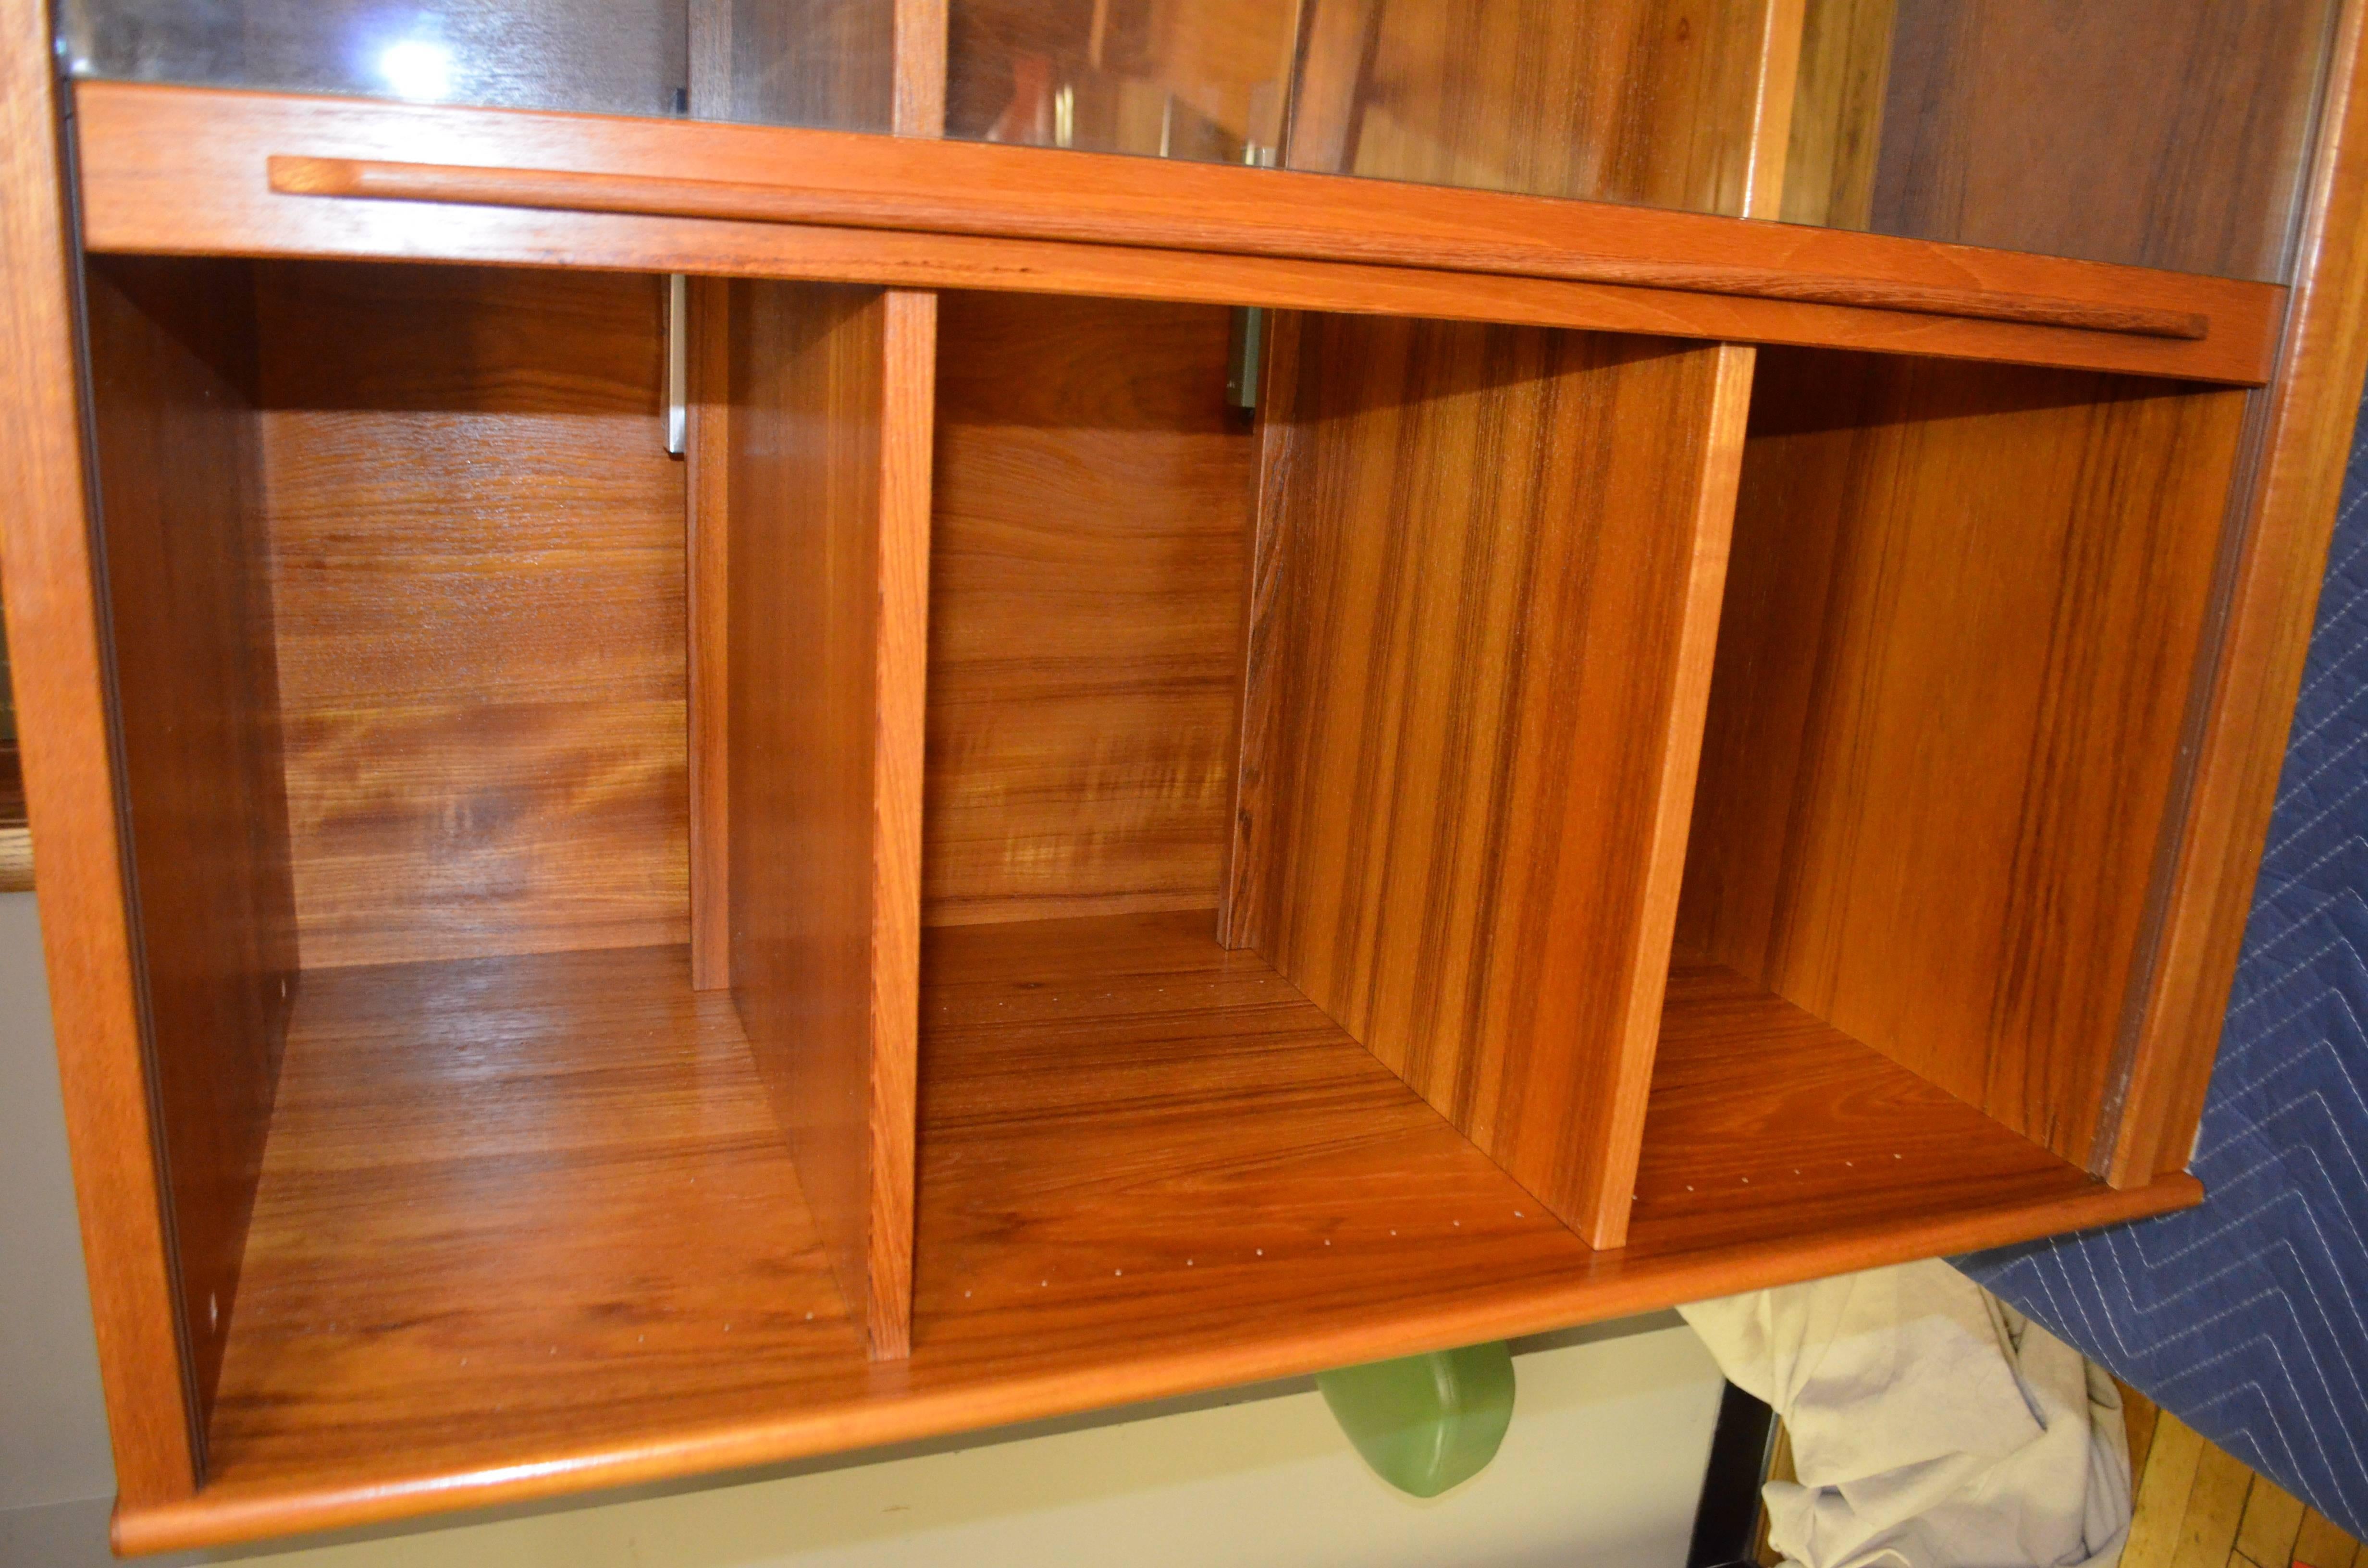 20th Century Storage Cabinet, Teak with Glass Doors, Wired for Electronics, Midcentury